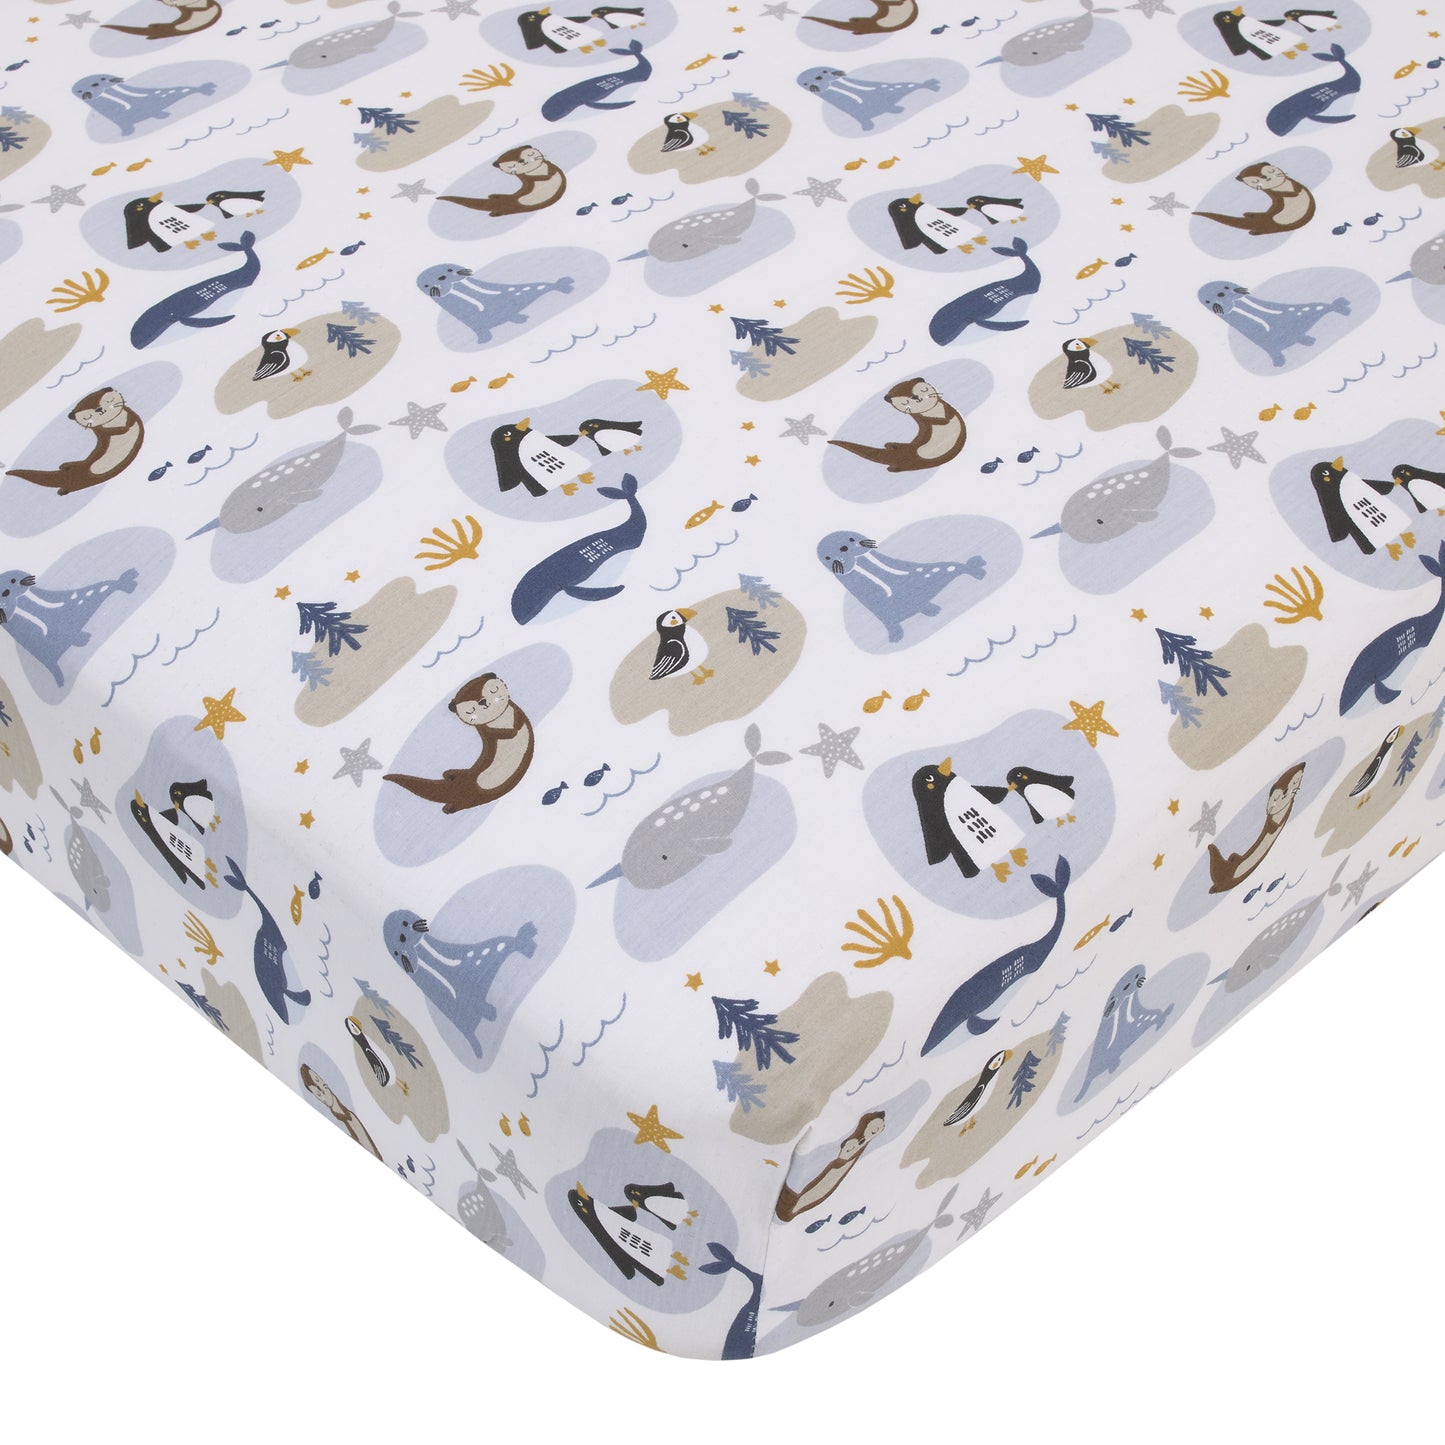 NoJo Arctic Adventure Light Blue, White, Taupe and Navy Whales, Walrus, and Otter 4 Piece Nursery Crib Bedding Set - Comforter, 100% Cotton Fitted Crib Sheet, Crib Skirt, and Storage Caddy